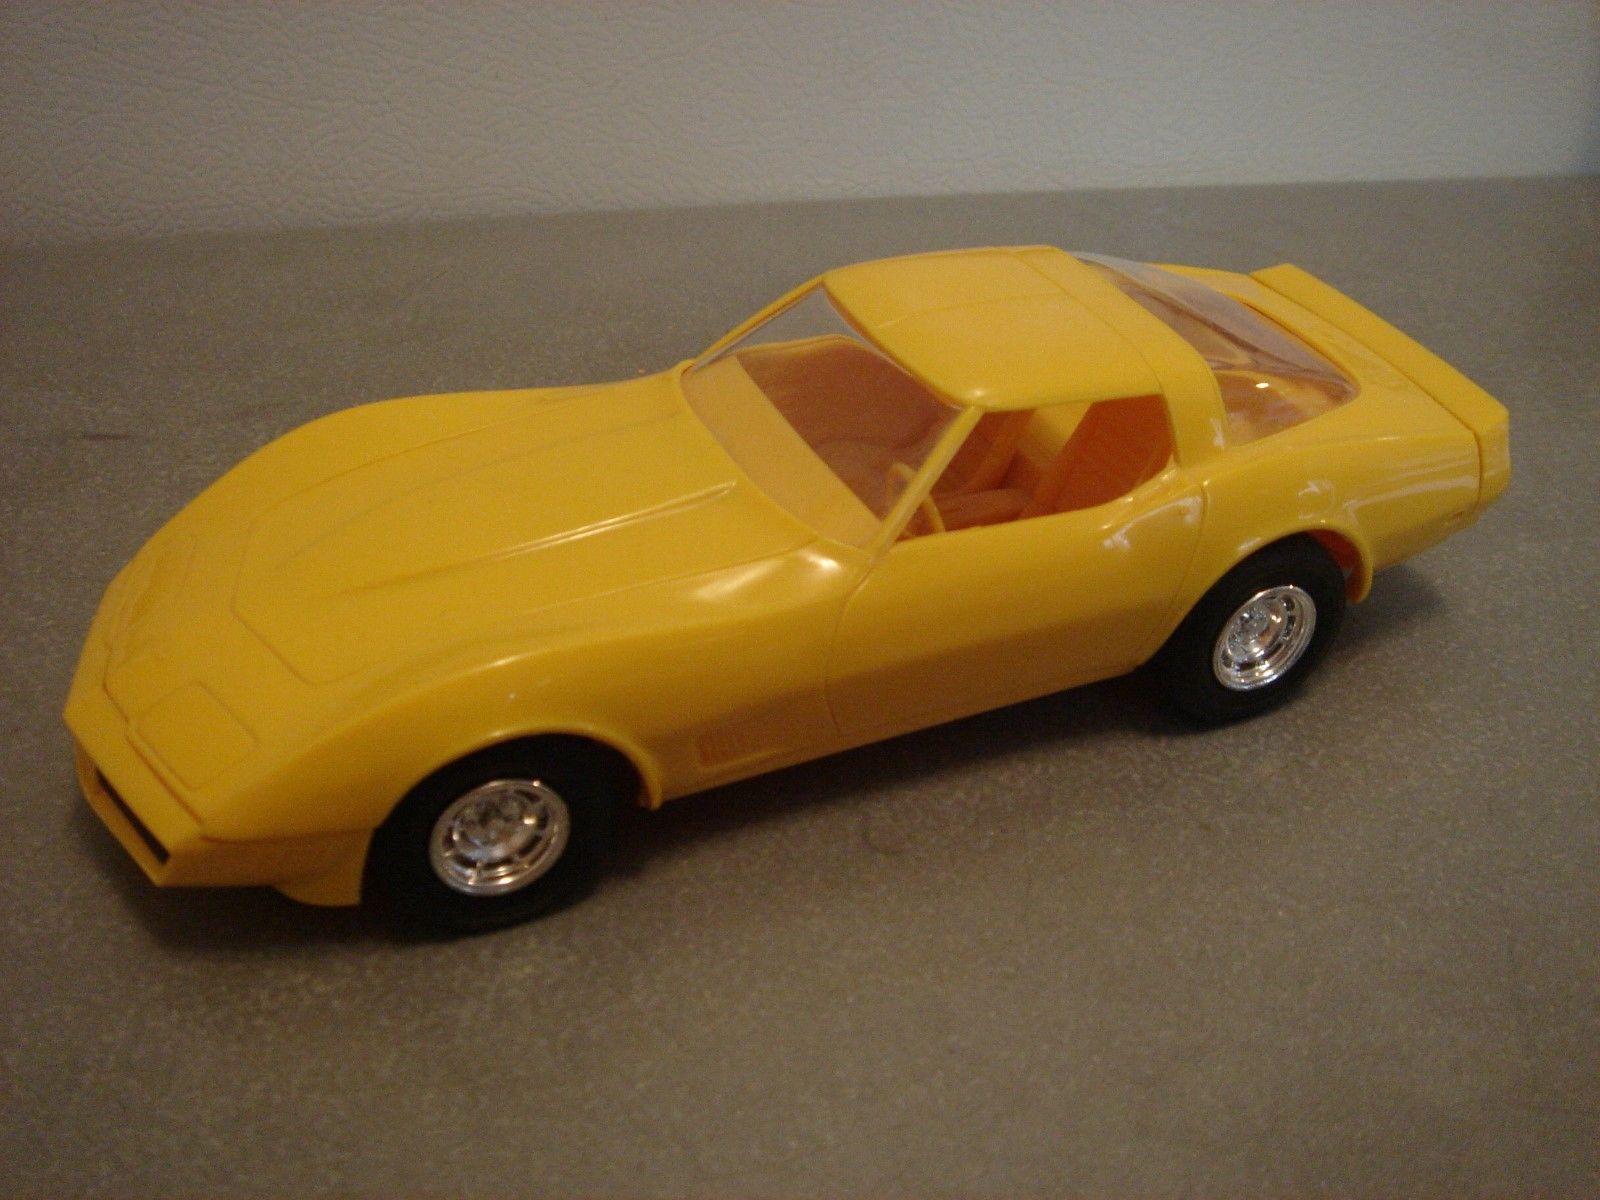 12 best Plastic toy cars images on Pinterest | Gay, Old fashioned ...